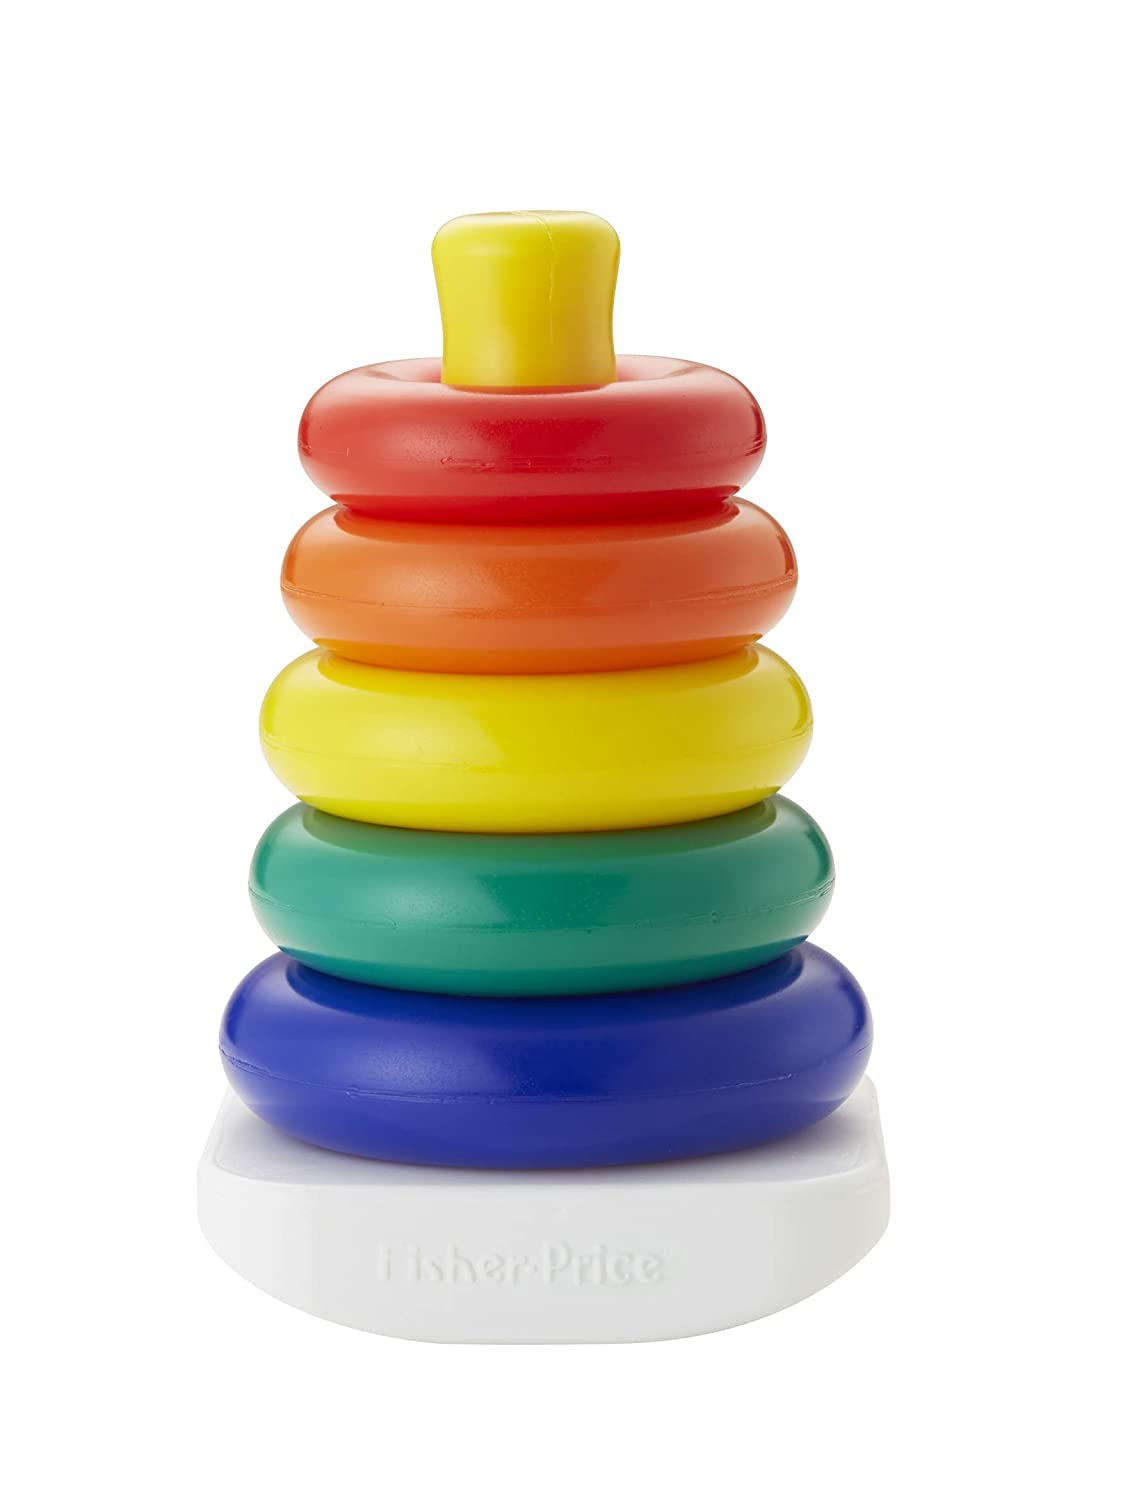 Rock-a-Stack - Classic stacking toy with 5 colorful rings to grasp, shake, and stack | Age :  0-3 Years by Fisher-price